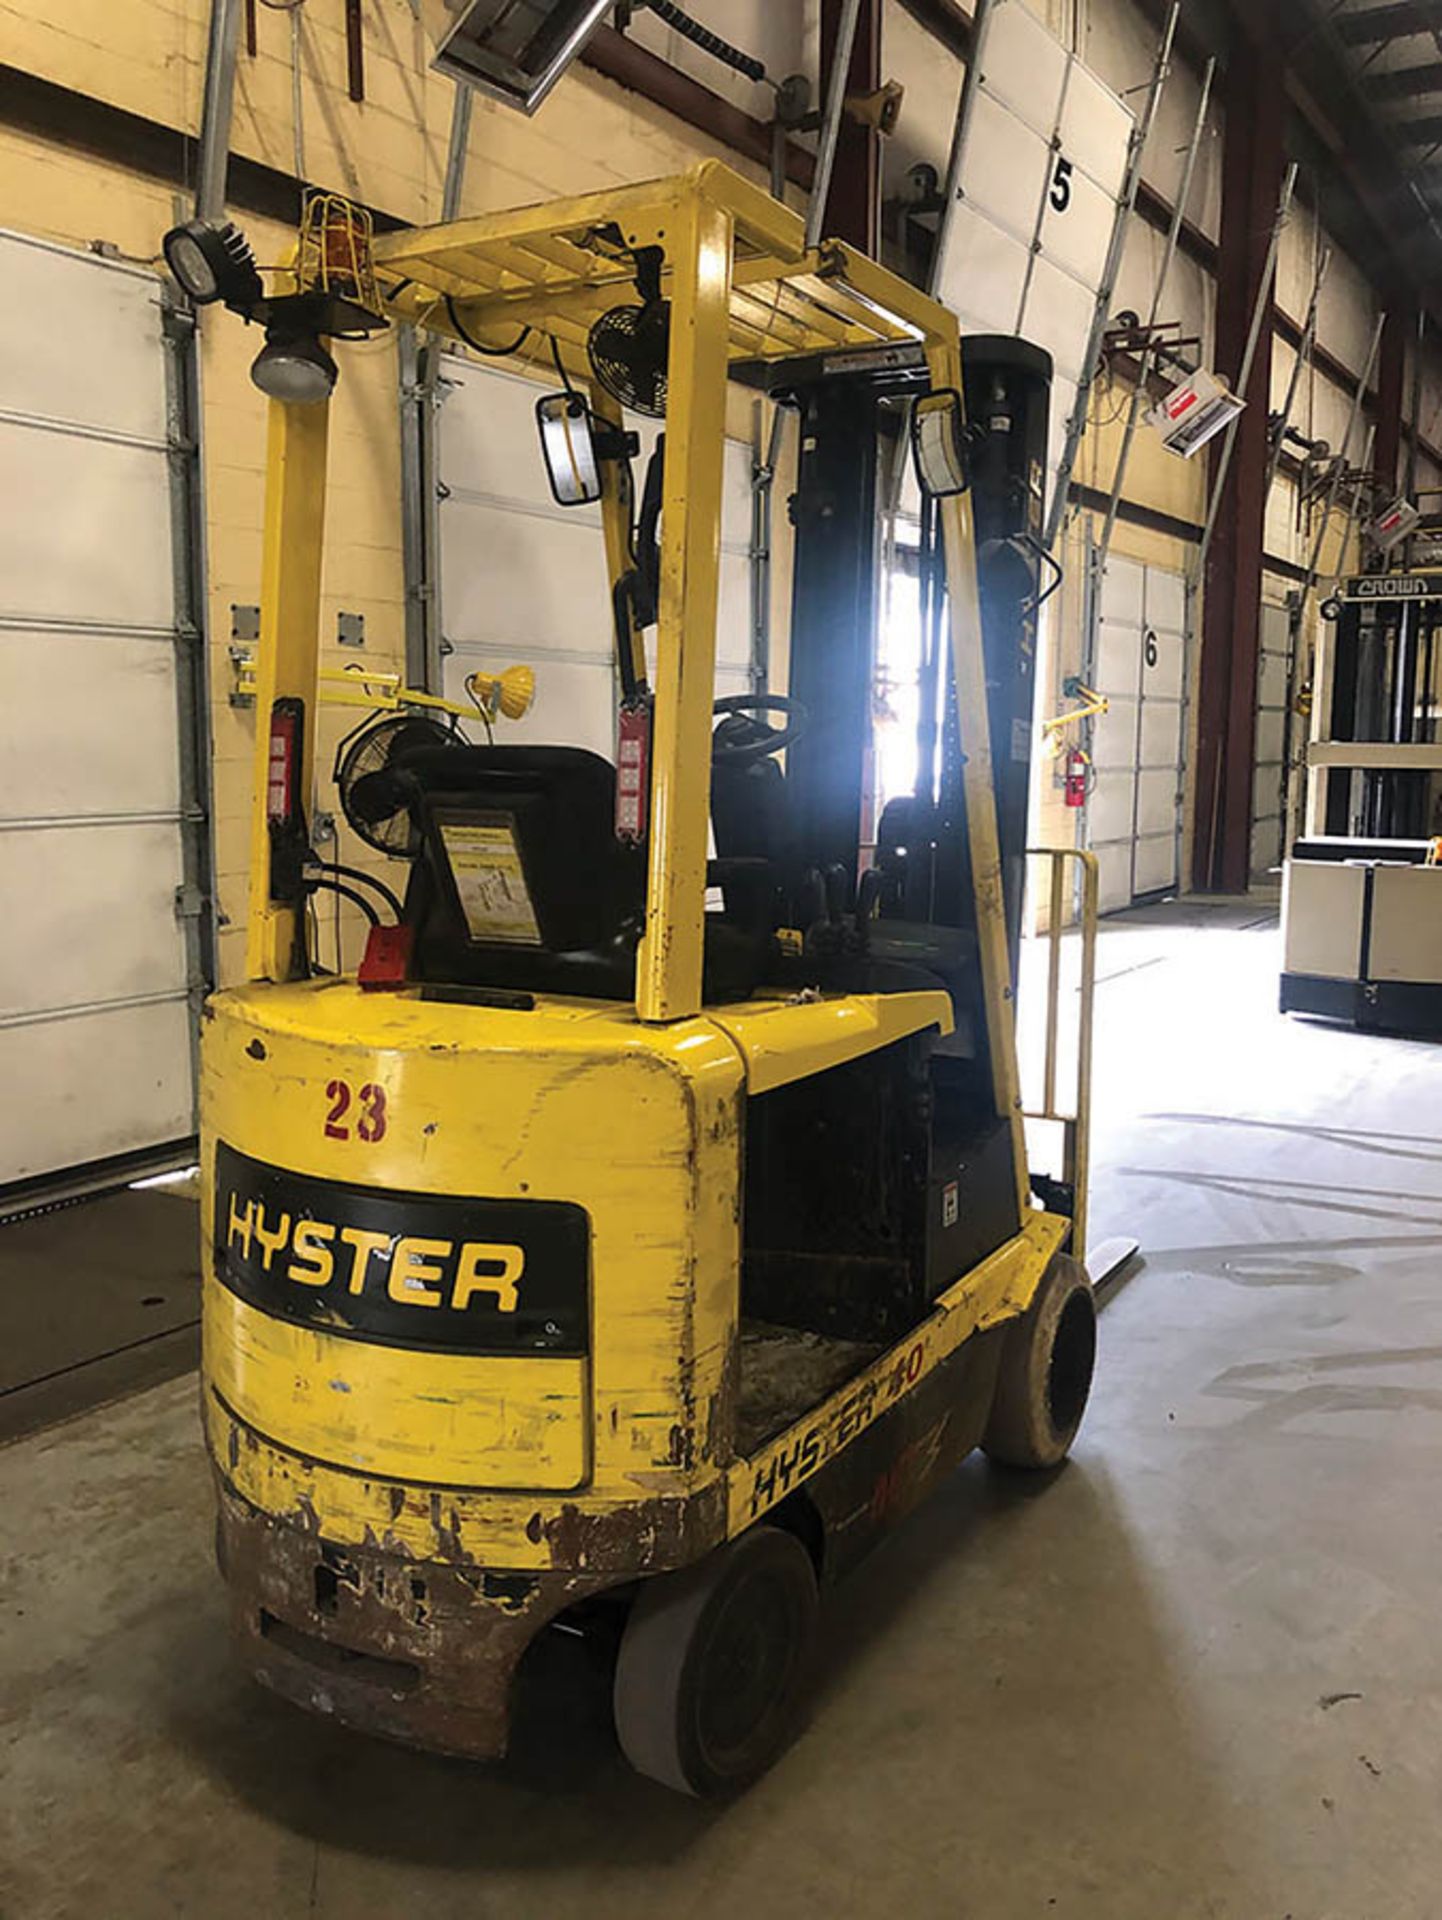 HYSTER ELECTRIC FORKLIFT, MODEL # E4025, S/N F114-02785H, 36 V, SIDE SHIFT, SOLID TIRES, THREE STAGE - Image 4 of 4